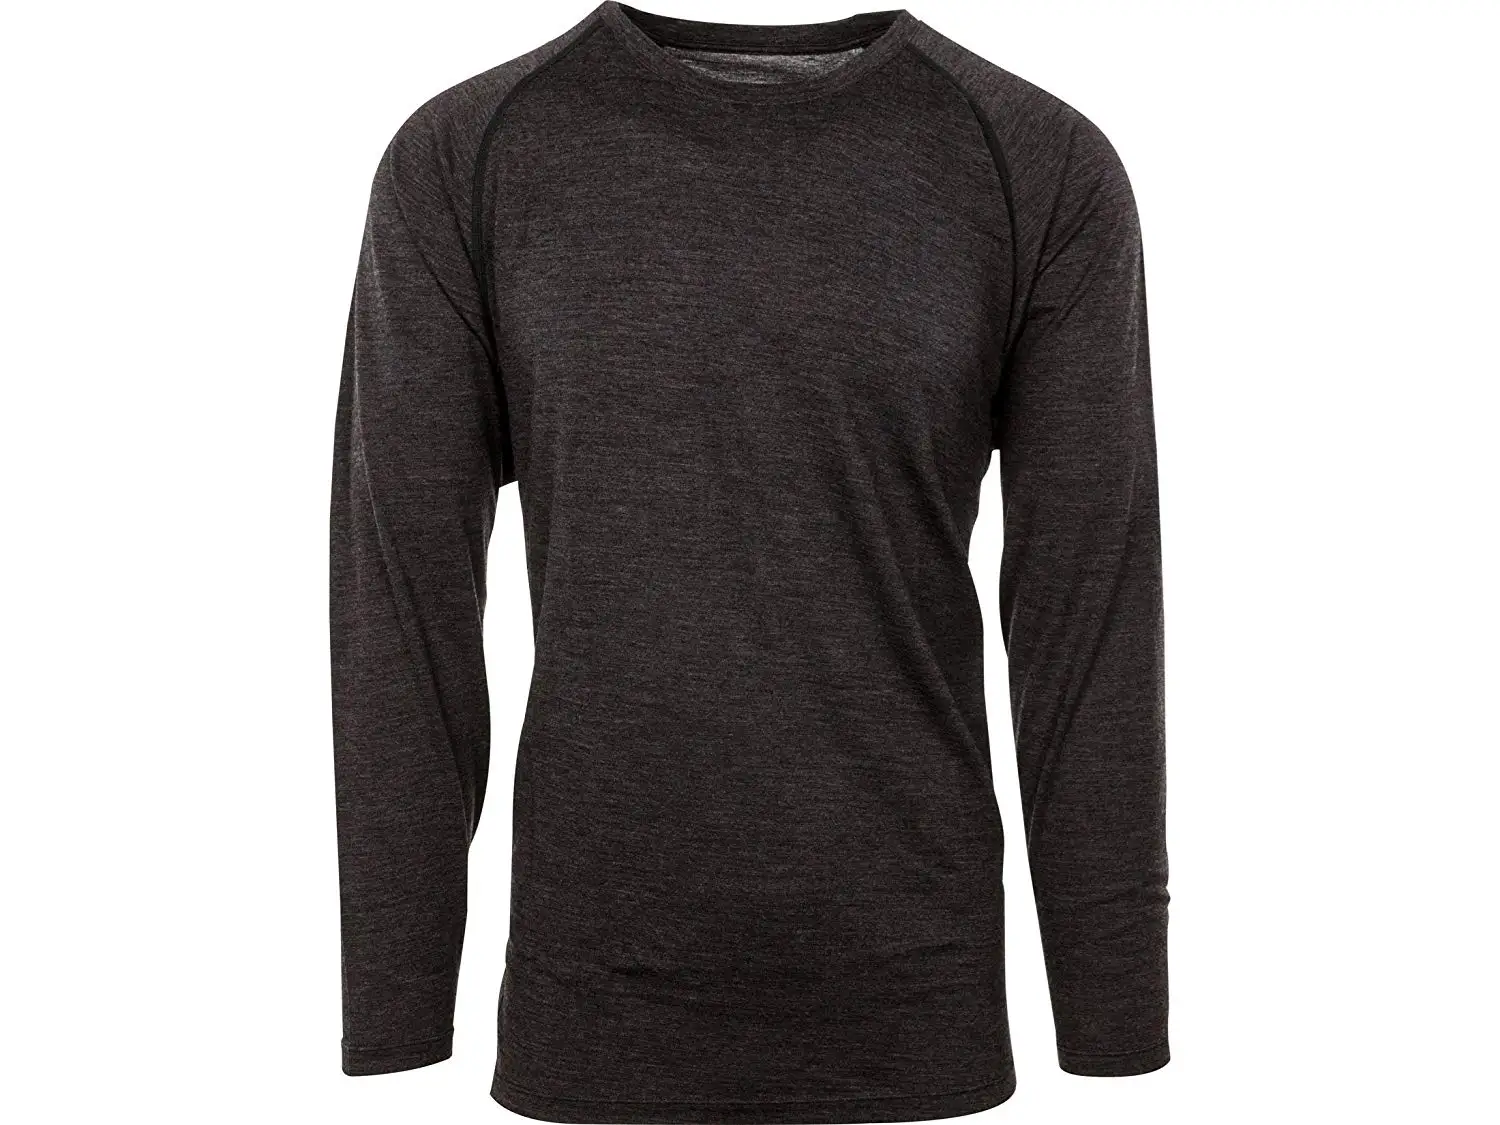 Cheap Layer 8 Long Sleeve, find Layer 8 Long Sleeve deals on line at ...